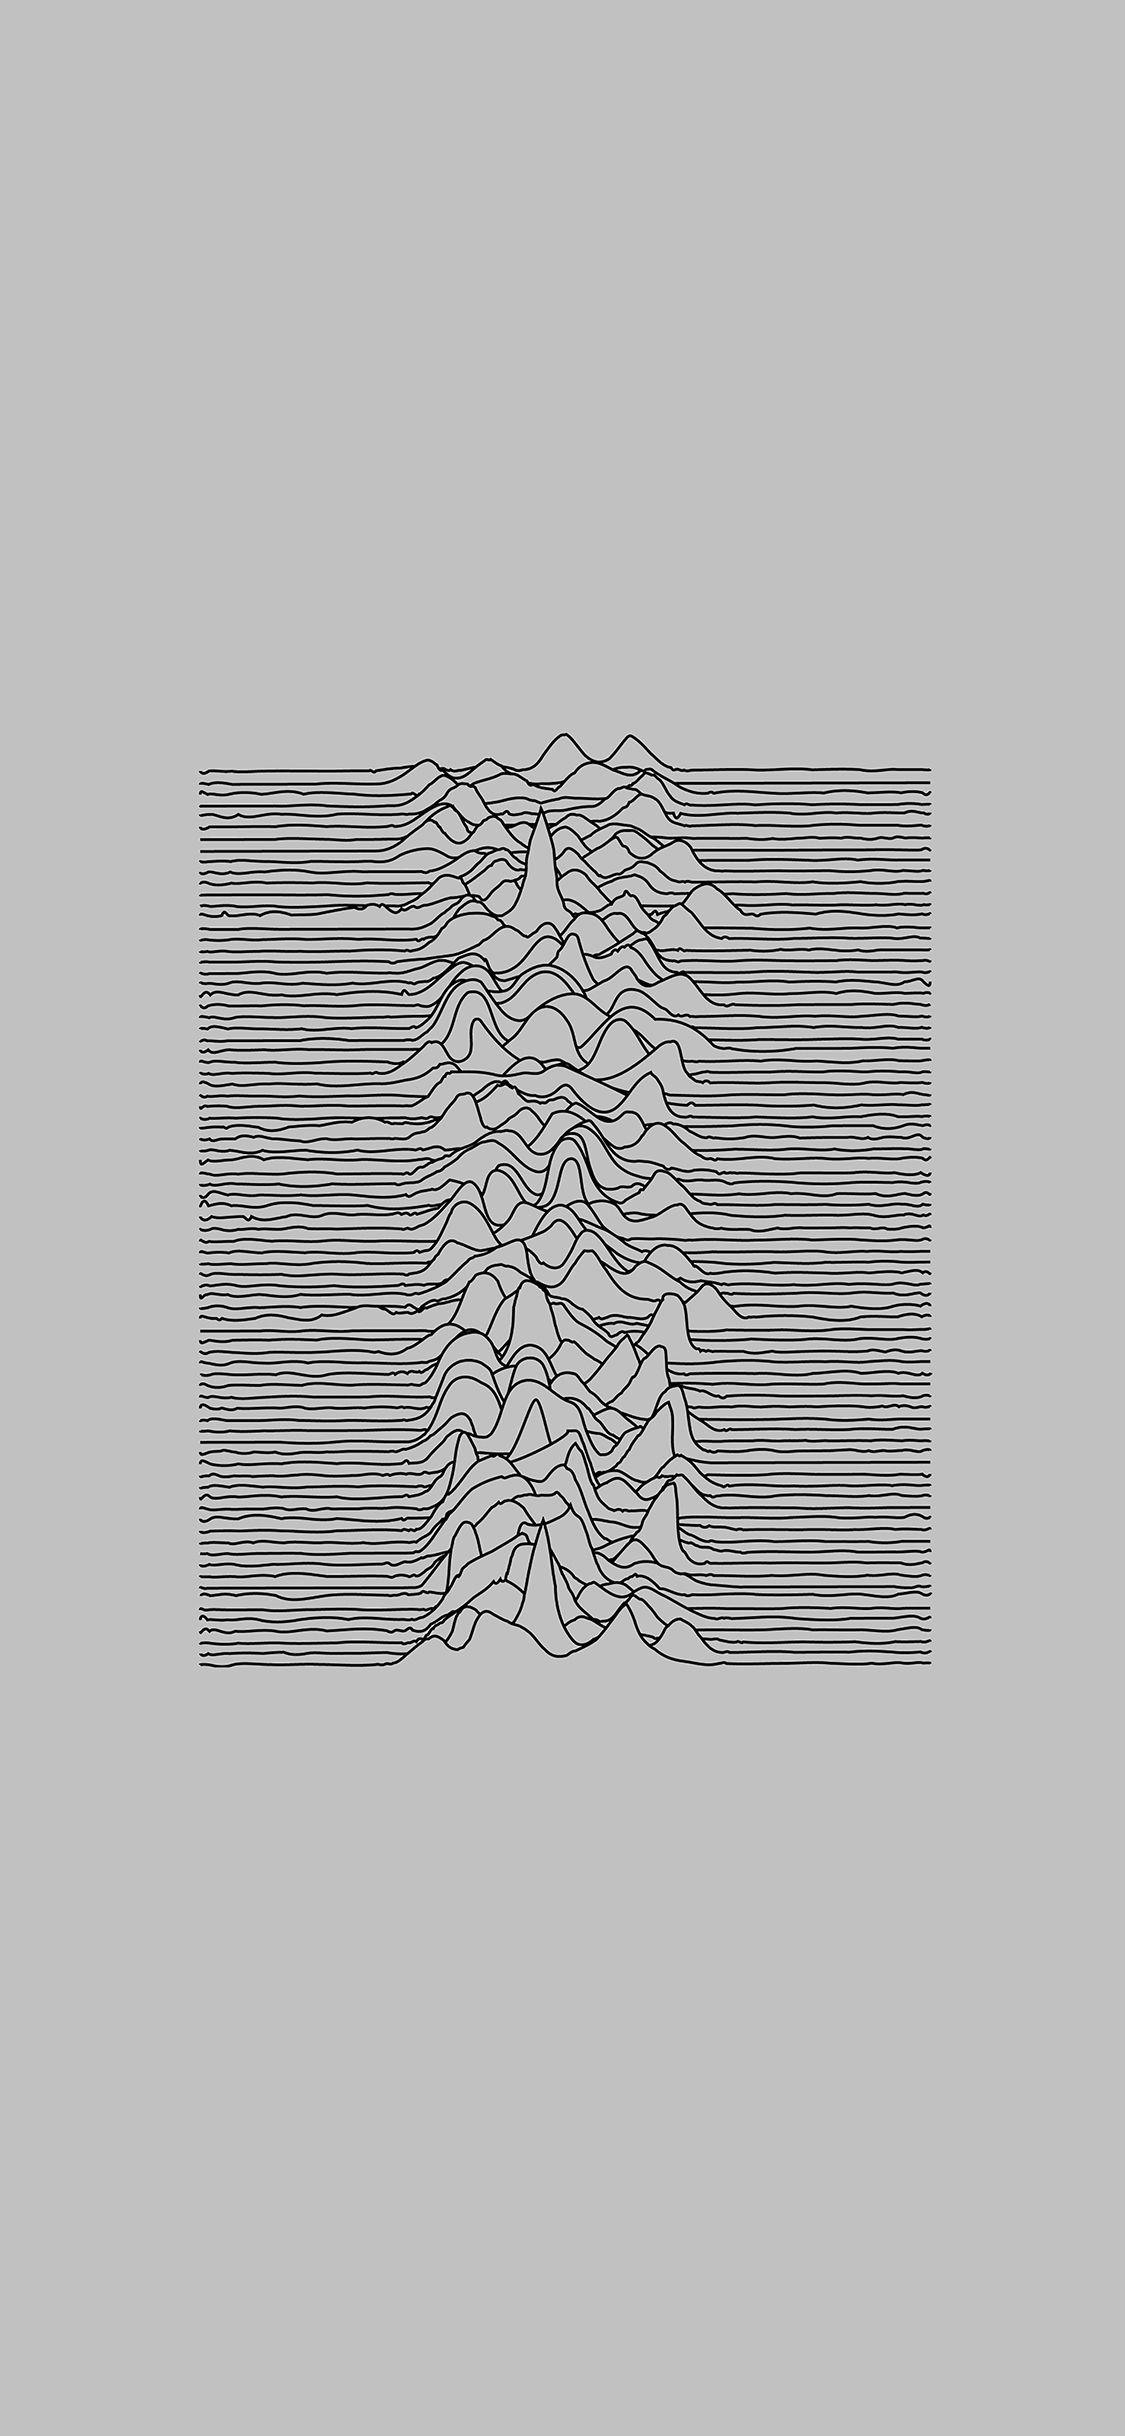 iPhone X wallpaper. joy division unknown